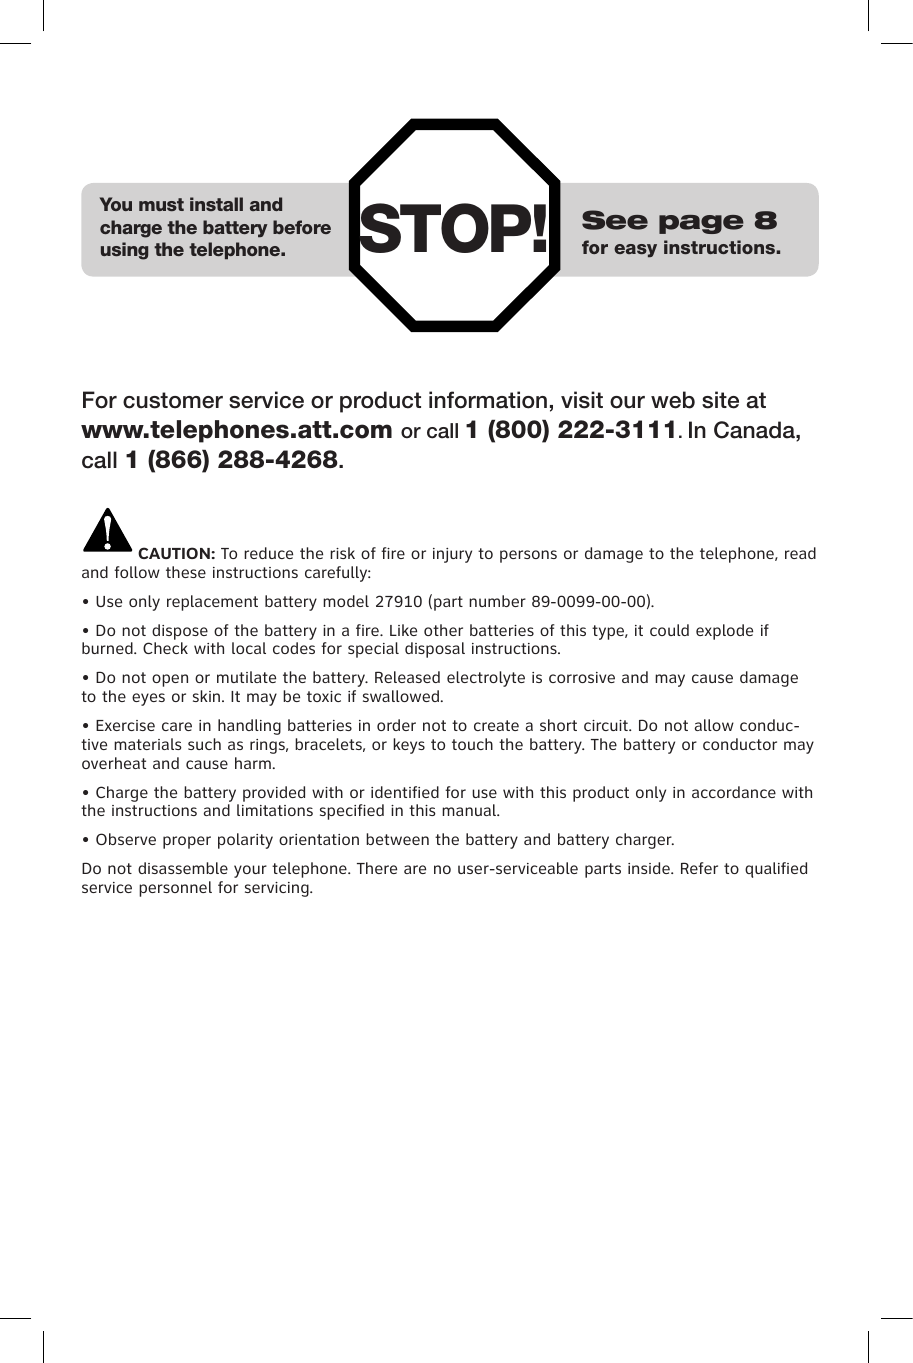 STOP! See page 8for easy instructions.You must install and charge the battery before using the telephone.For customer service or product information, visit our web site at www.telephones.att.com or call 1 (800) 222-3111. In Canada, call 1 (866) 288-4268.CAUTION: To reduce the risk of fire or injury to persons or damage to the telephone, read and follow these instructions carefully:• Use only replacement battery model 27910 (part number 89-0099-00-00).• Do not dispose of the battery in a fire. Like other batteries of this type, it could explode if burned. Check with local codes for special disposal instructions.• Do not open or mutilate the battery. Released electrolyte is corrosive and may cause damage to the eyes or skin. It may be toxic if swallowed.• Exercise care in handling batteries in order not to create a short circuit. Do not allow conduc-tive materials such as rings, bracelets, or keys to touch the battery. The battery or conductor may overheat and cause harm.• Charge the battery provided with or identified for use with this product only in accordance with the instructions and limitations specified in this manual.• Observe proper polarity orientation between the battery and battery charger.Do not disassemble your telephone. There are no user-serviceable parts inside. Refer to qualified service personnel for servicing.